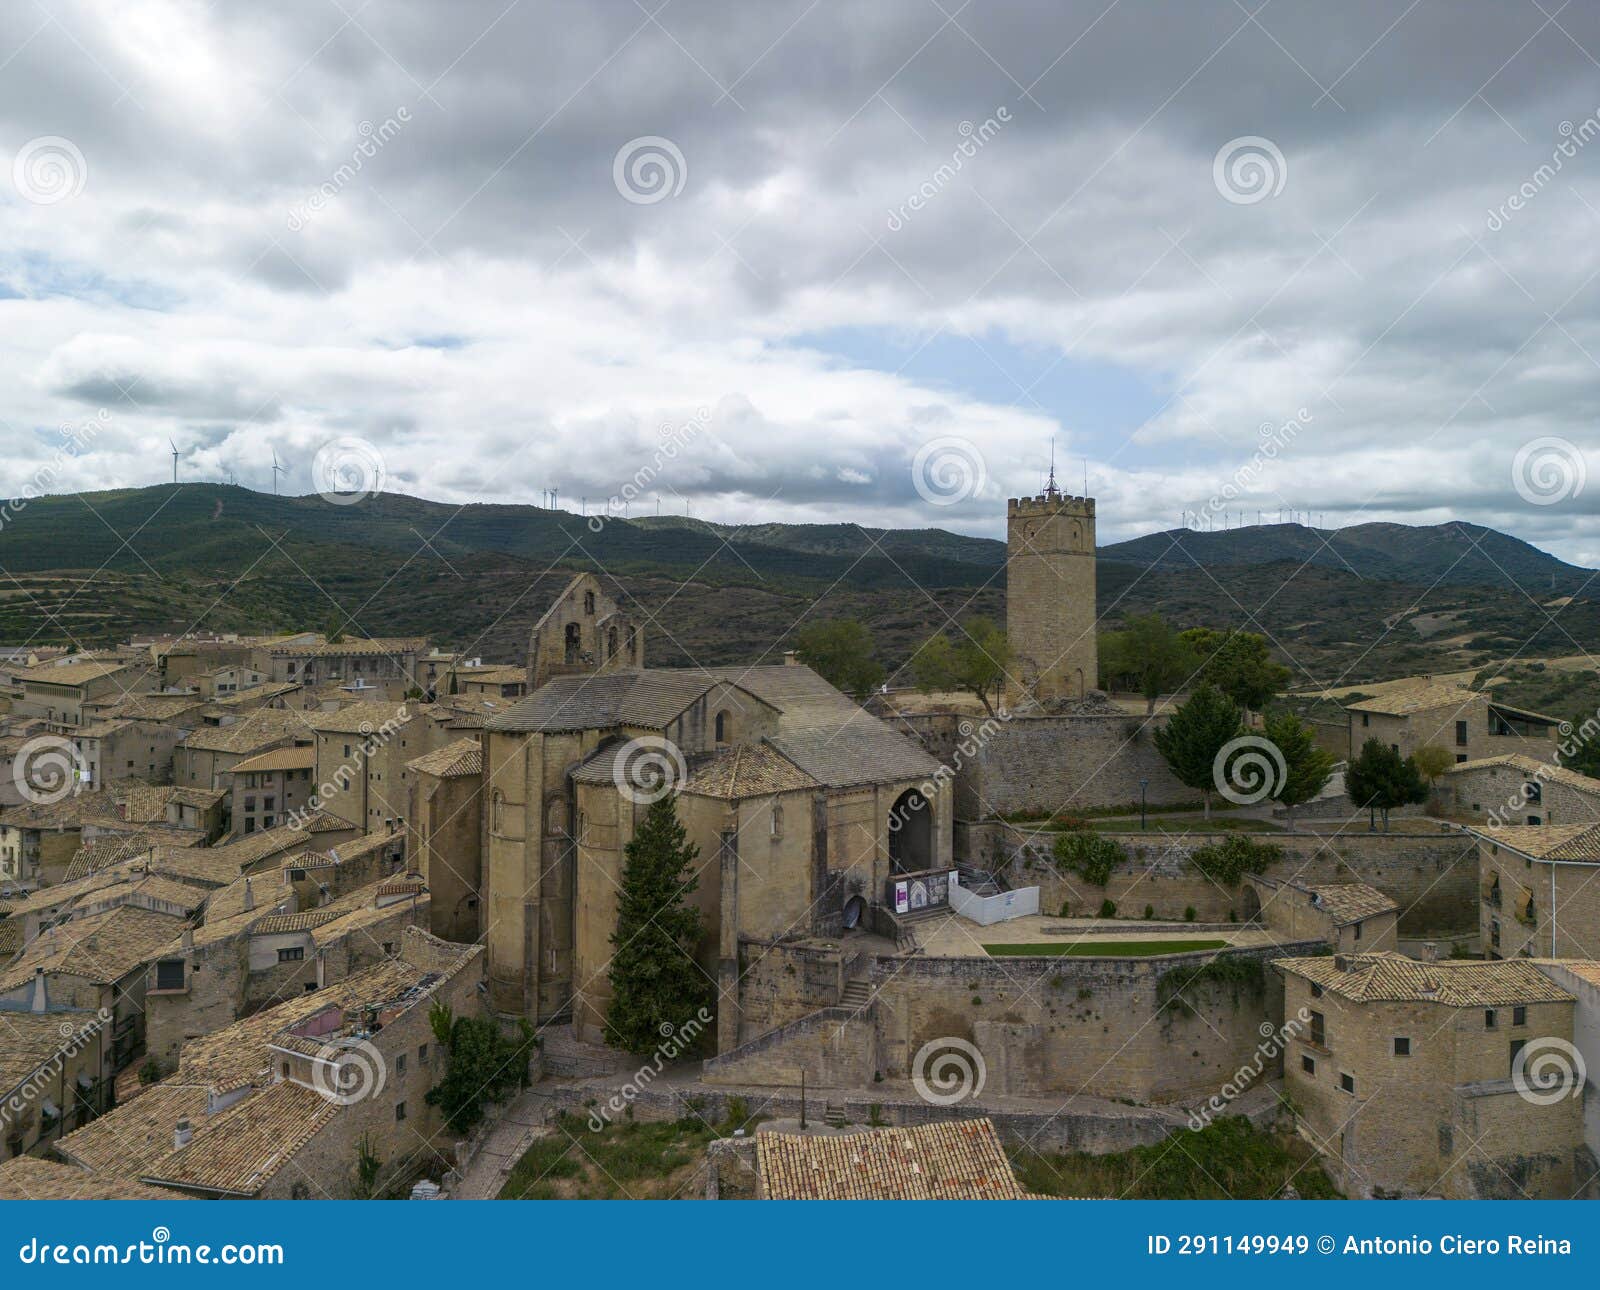 aerial view of the medieval town of sos del rey catÃ³lico in aragon, spain.